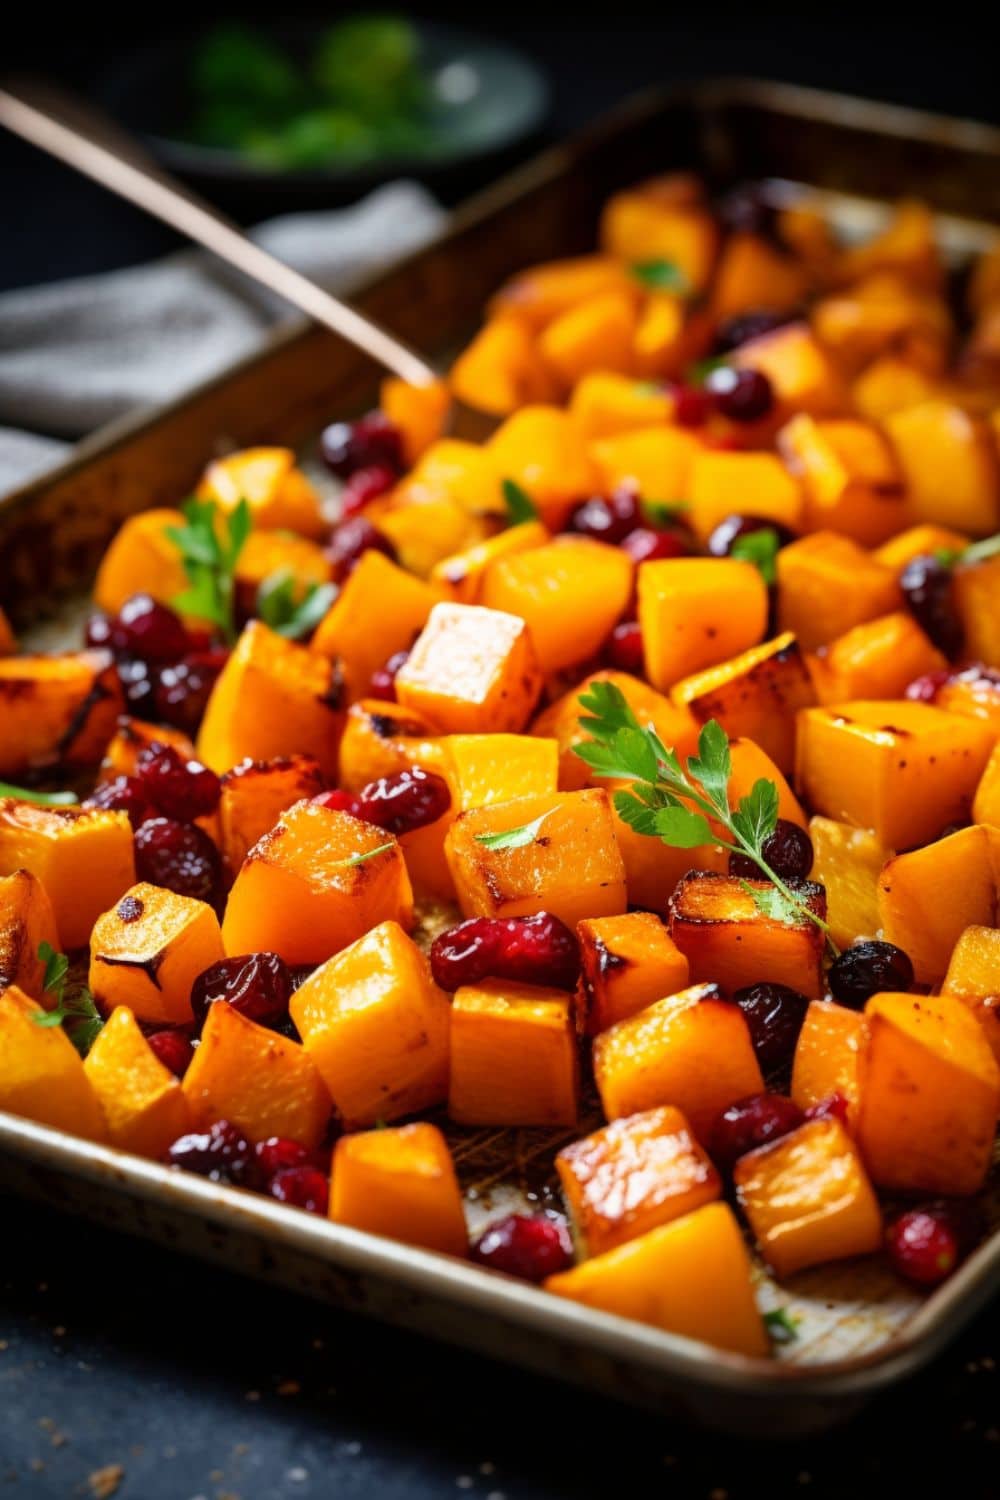 Roasted butternut squash with caramelized edges and fresh cranberries on a baking tray.